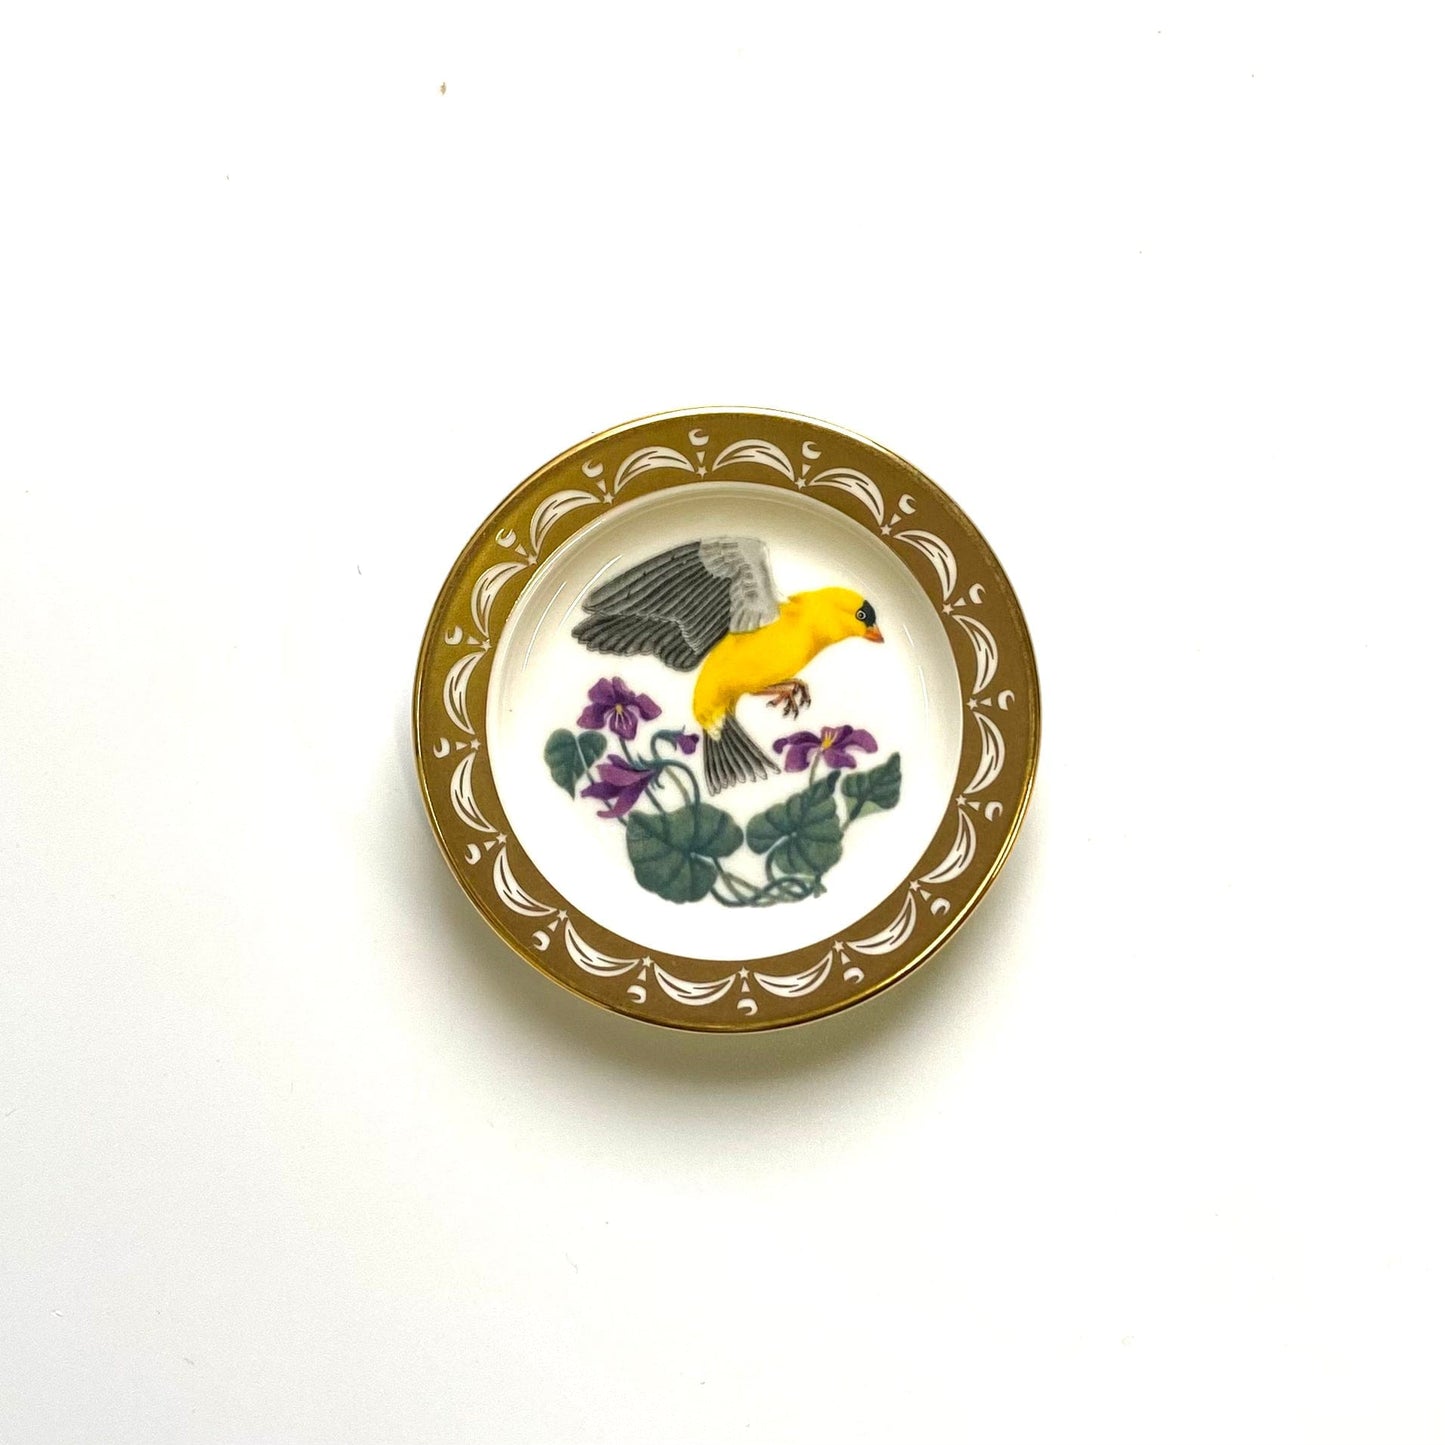 Franklin Porcelain State Birds and Flowers Miniature Plate NEW JERSEY Eastern Goldfinch / Violet